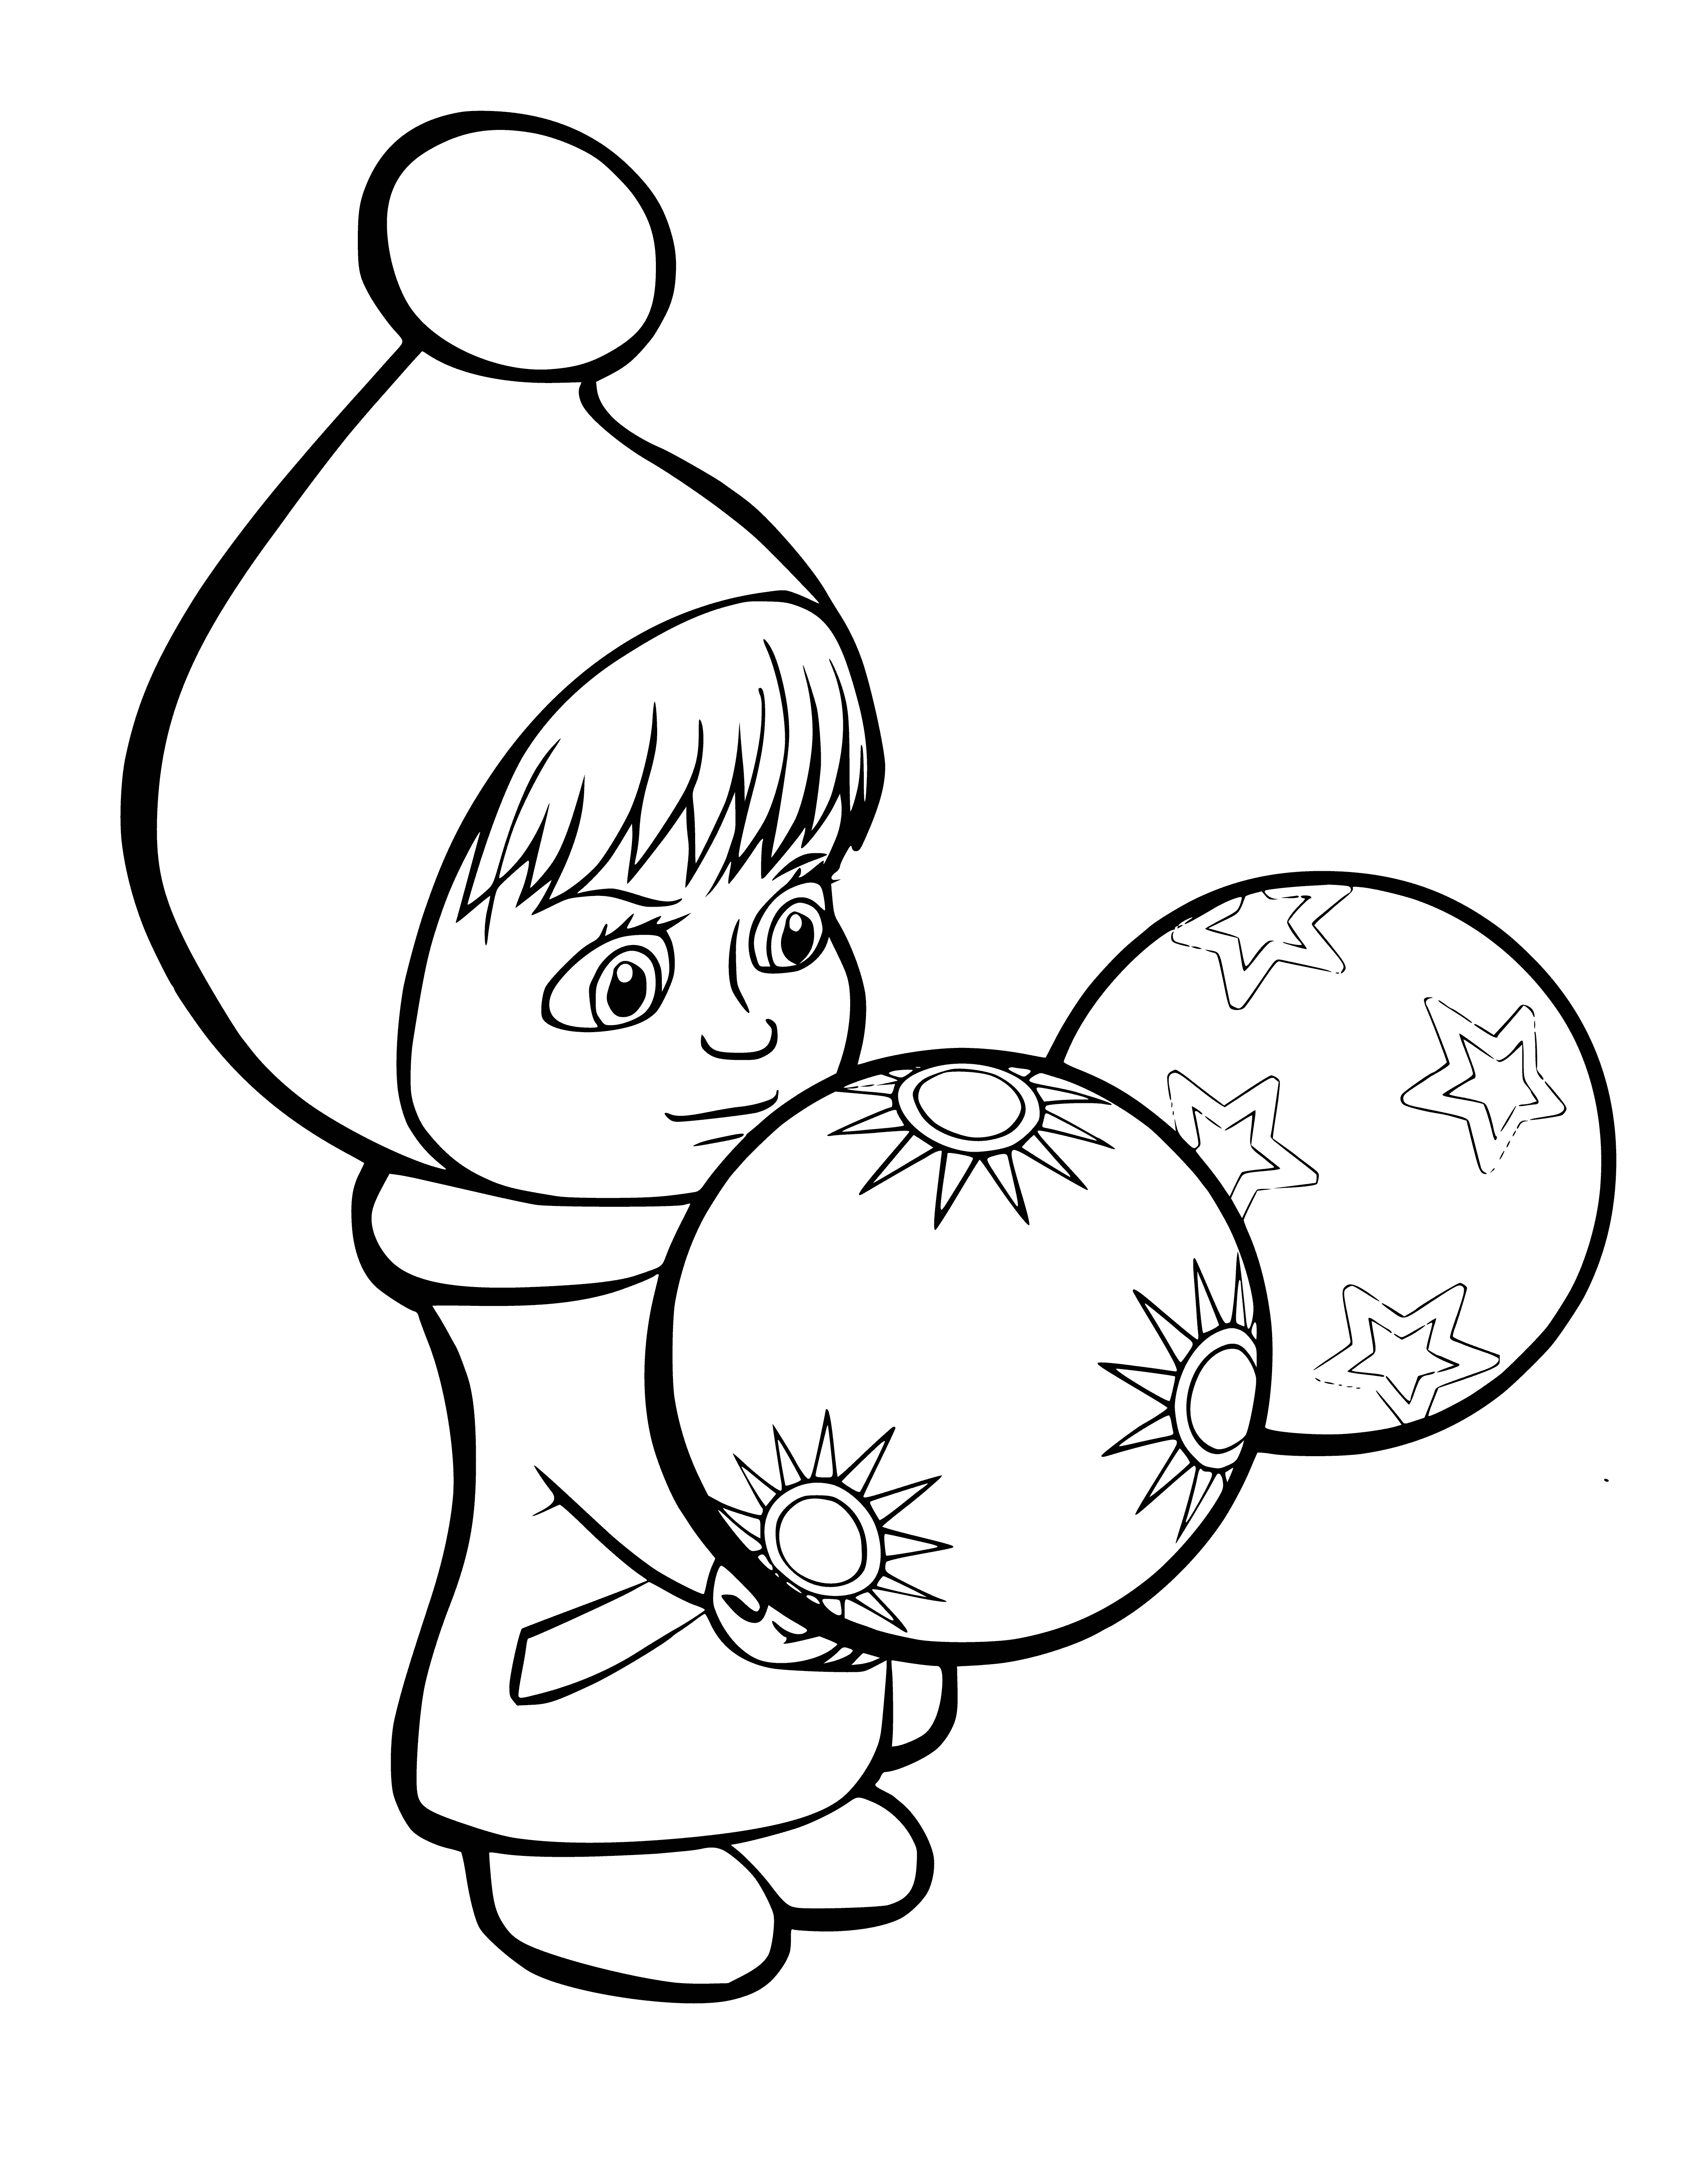 coloring page: Masha, a little girl with blonde hair and a red dress, holds a Christmas decoration and has a big smile.